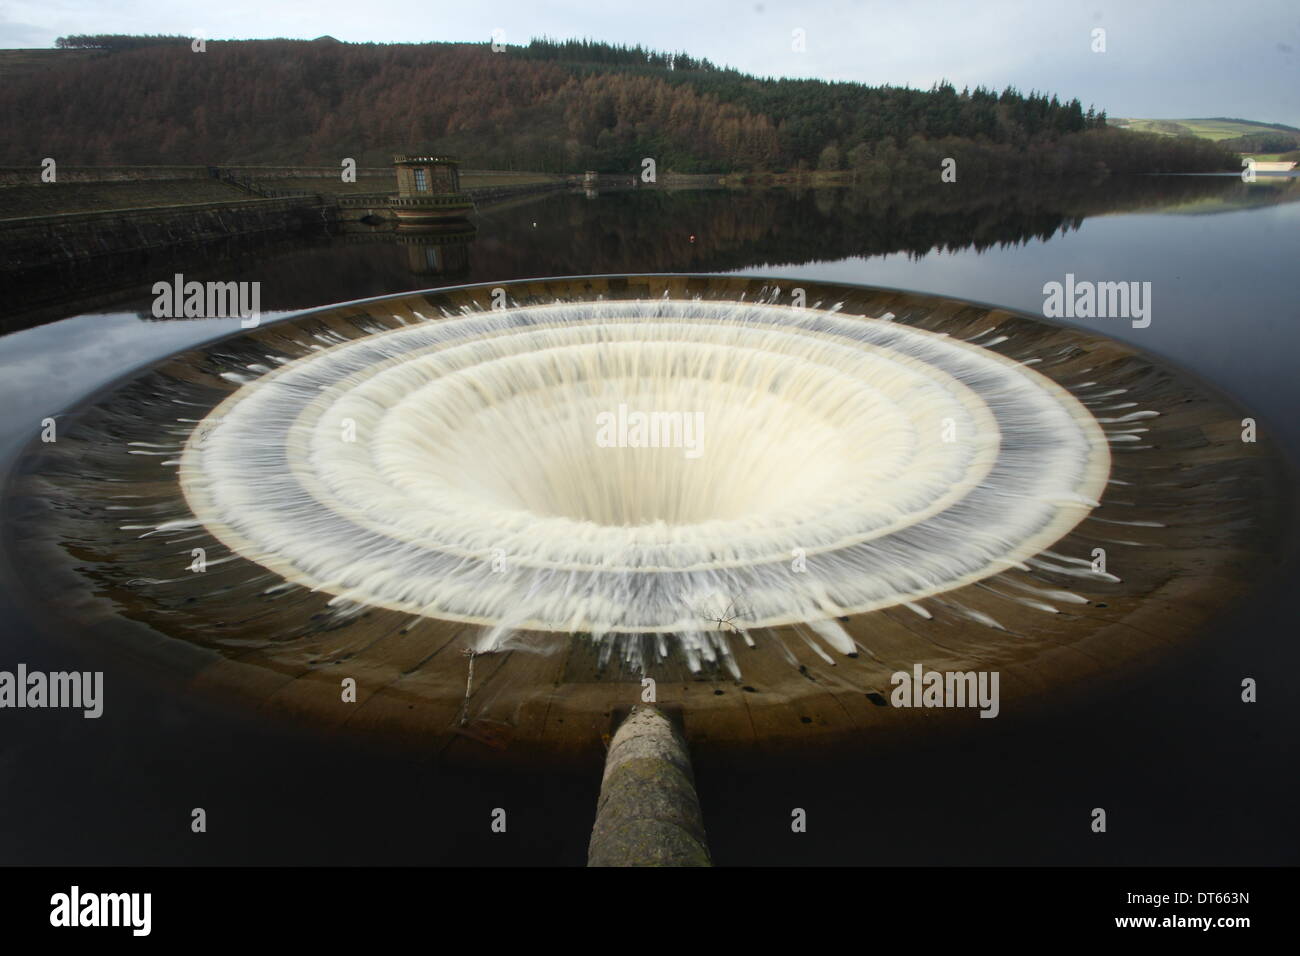 Thoudands of gallons of overflow water plunges down a bellmouth spillway shaft in Ladybower Reservoir, Upper Derwent Valley, Peak District Derbyshire UK Stock Photo